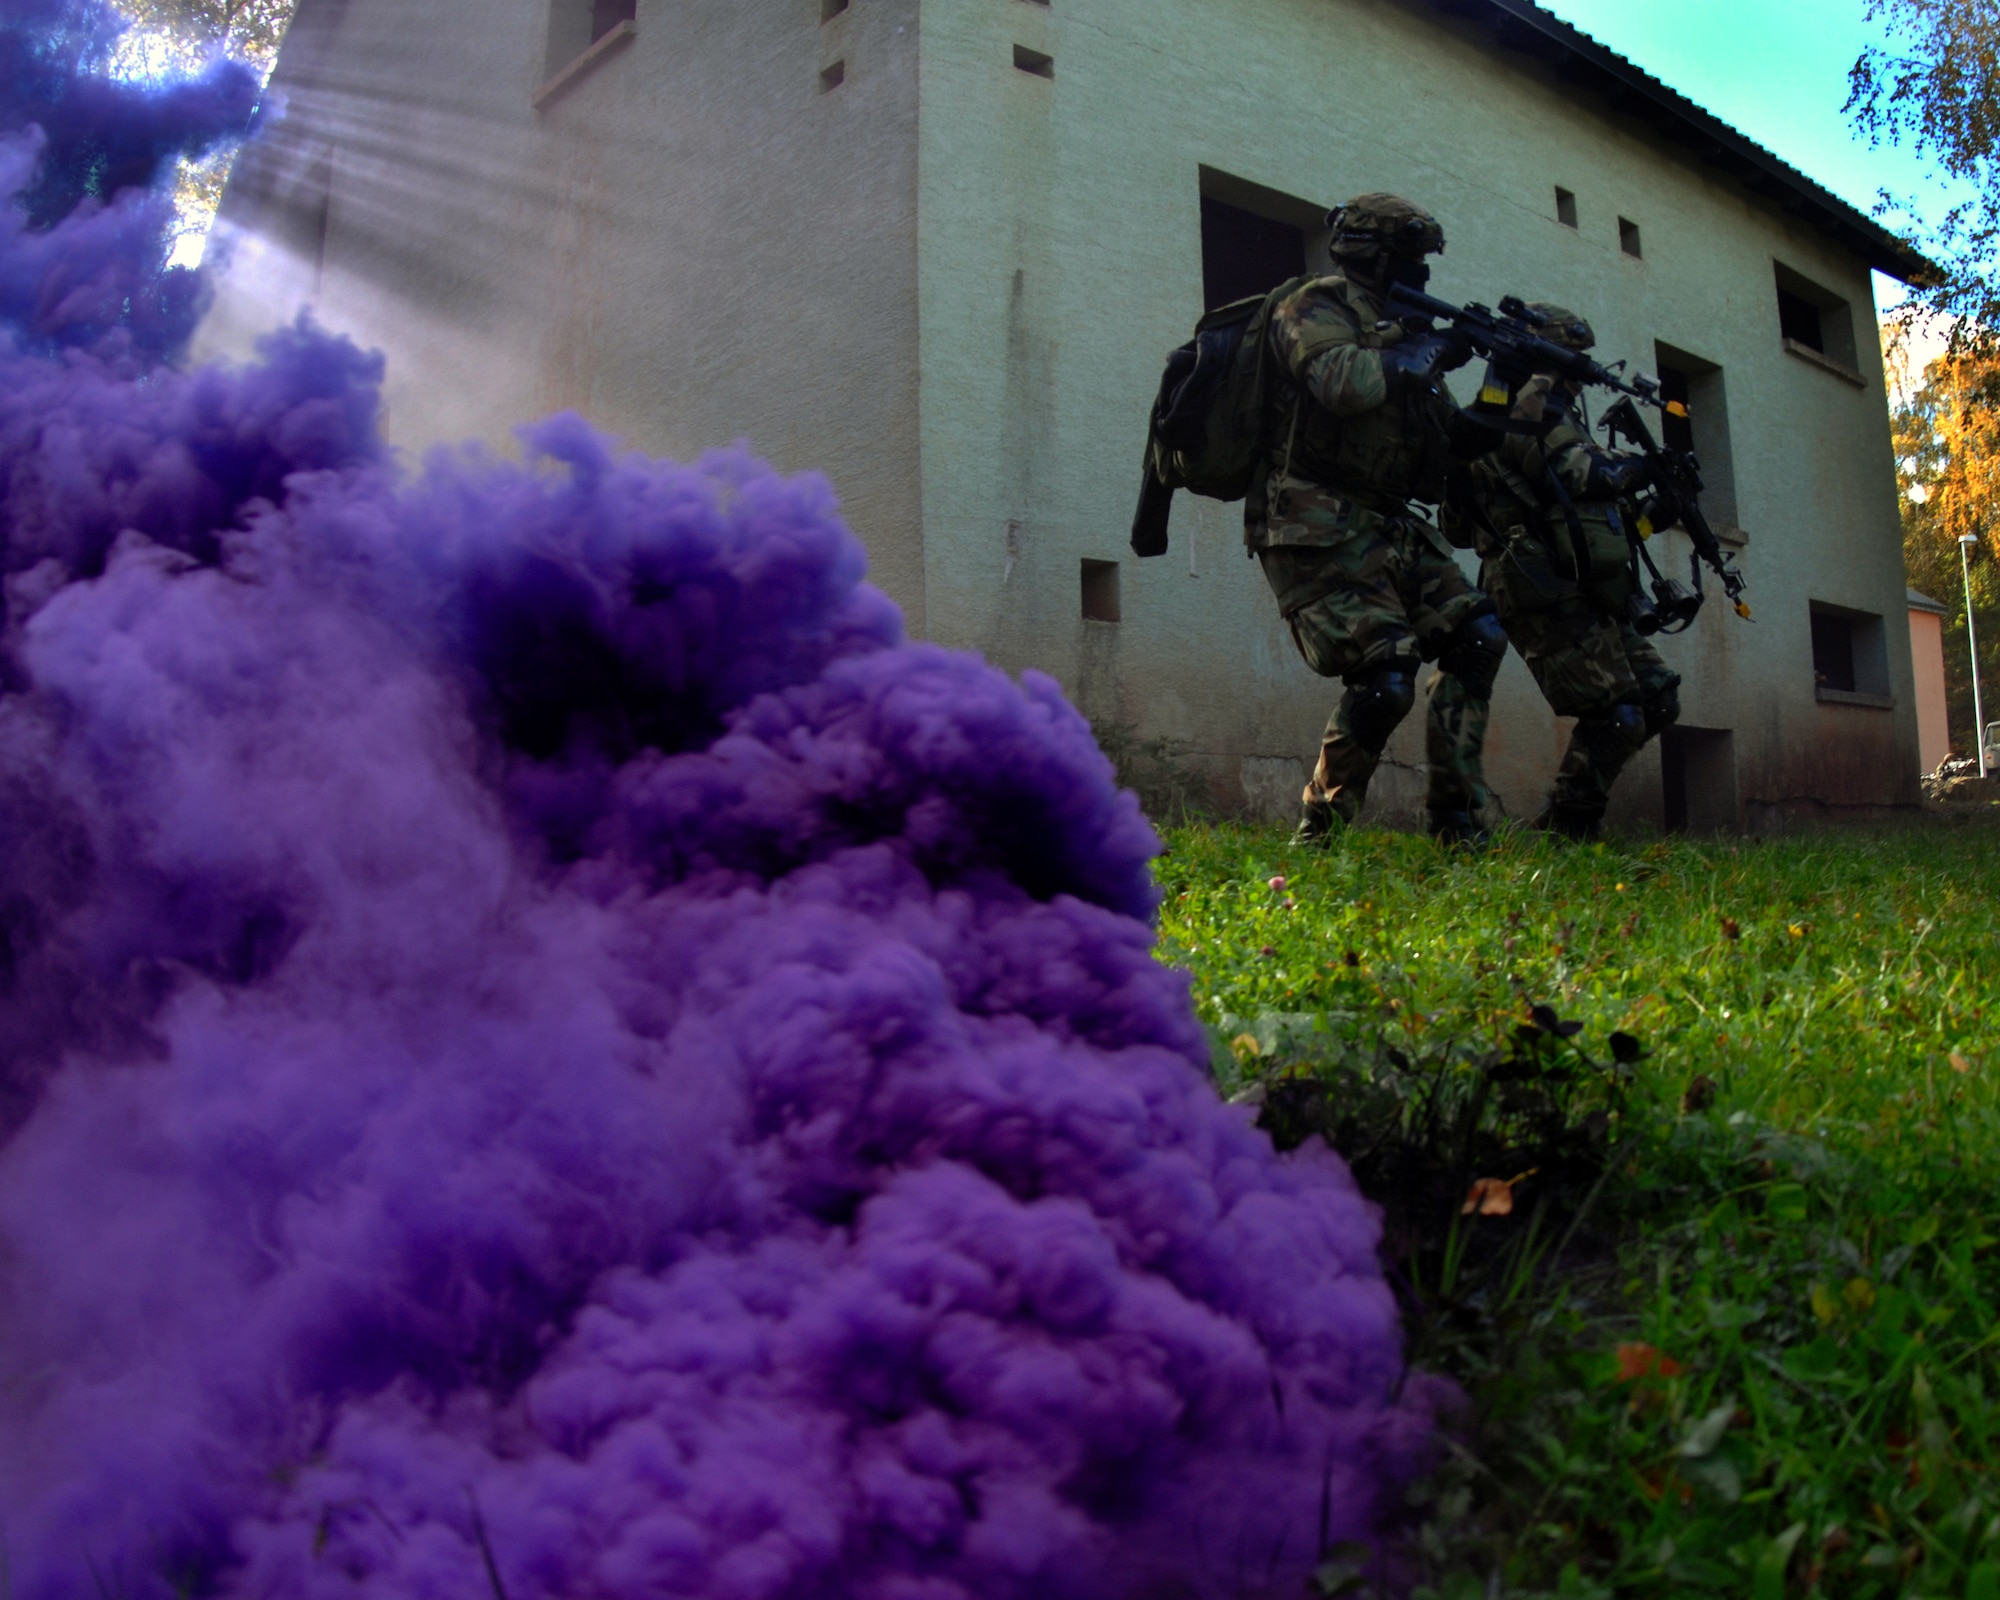 Senior Airman Marques Lipford (left) and Staff Sgt. Lindsy Lyons, from the 31st Security Forces Squadron at Aviano Air Base, Italy, move swiftly through a purple haze so as not to be seen by the enemy during Military Operation and Urban Terrain exercise at Baumholder, Germany Oct. 20. The exercise taught security forces Airmen techniques to use when raiding and searching buildings and houses. (U.S. Air Force photo/Airman 1st Class Kenny Holston)